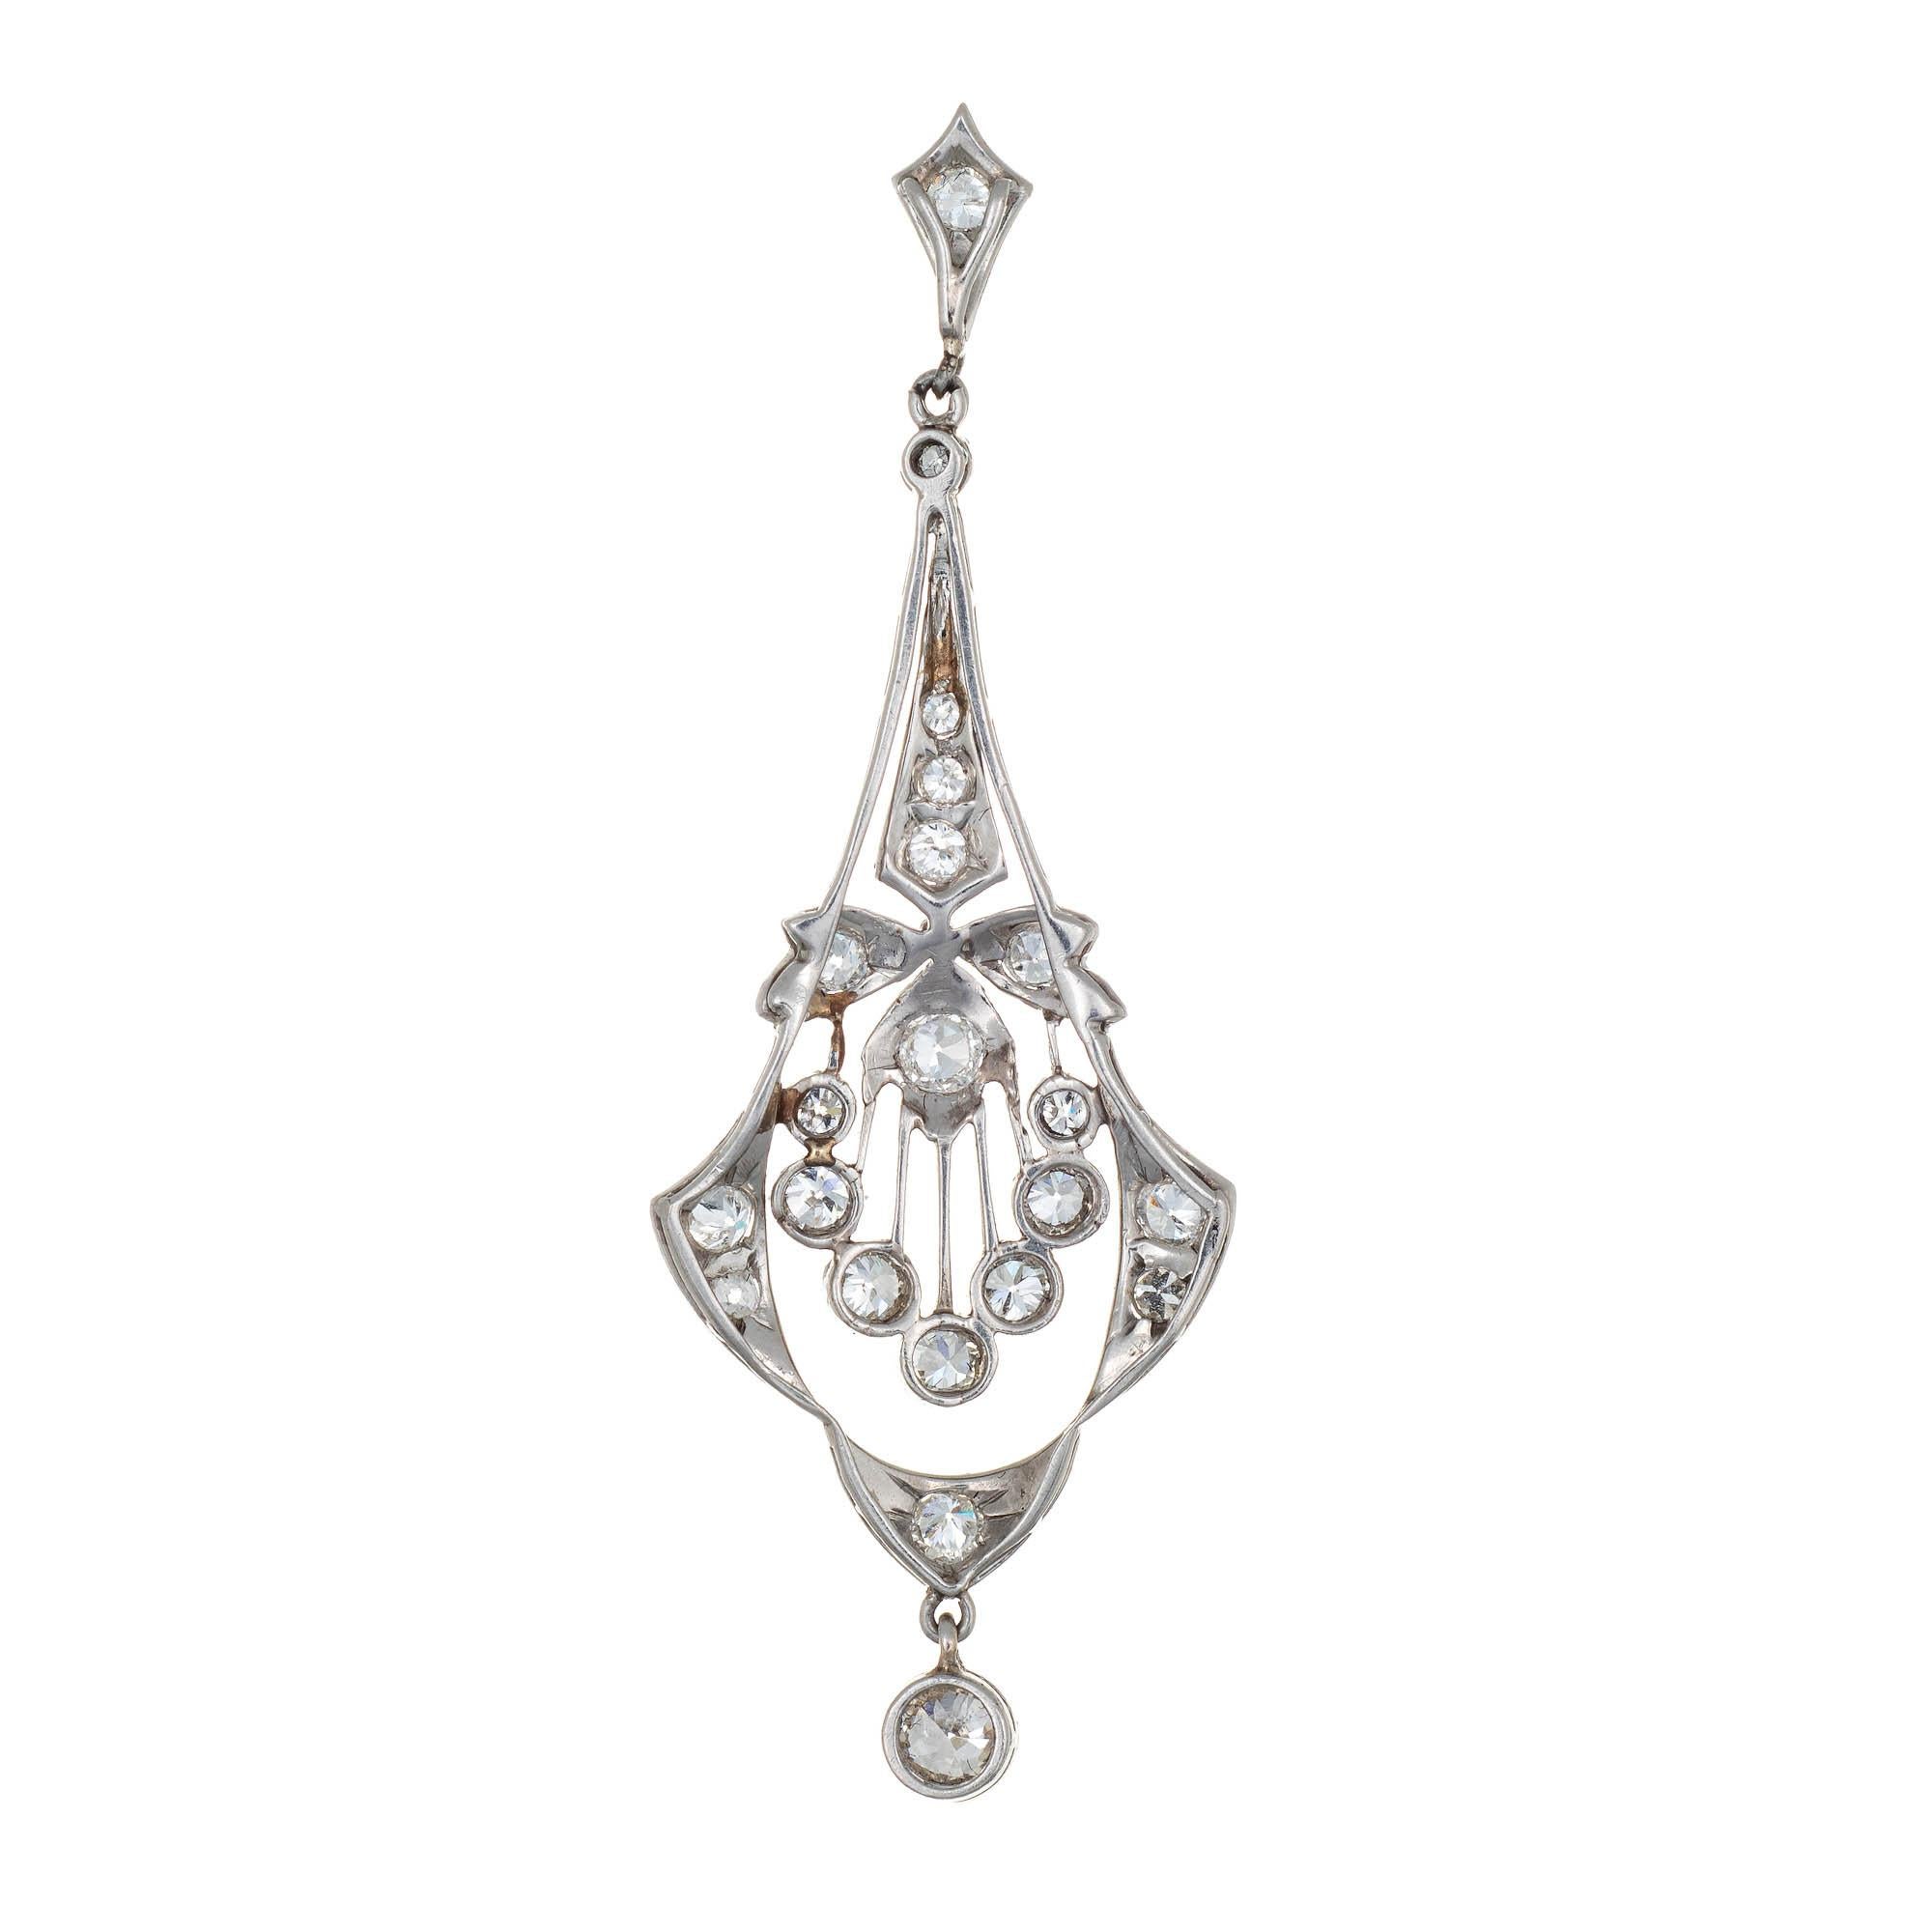 Finely detailed antique Edwardian diamond pendant crafted in platinum (circa 1910s to 1920s).  

Old European cut diamonds range in size from 0.01 to 0.10 carats and total an estimated 1 carat (estimated at H-I color and VS2-SI1 clarity). 

The